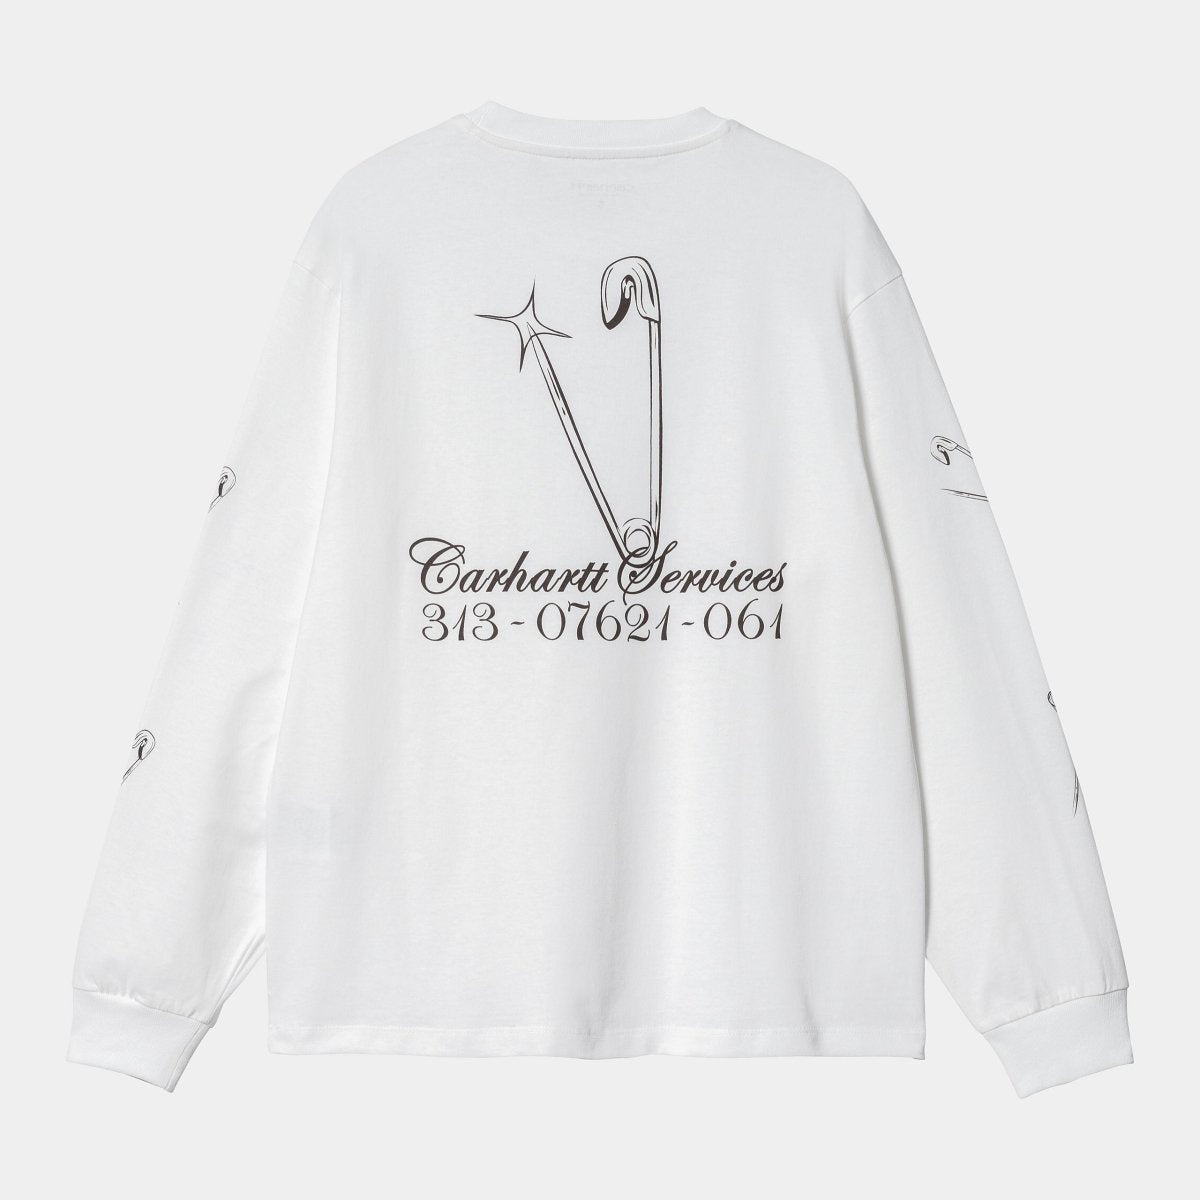 Carhartt WIP L/S Safety Pin T-Shirt White/Bordeaux - KYOTO - Carhartt WIP